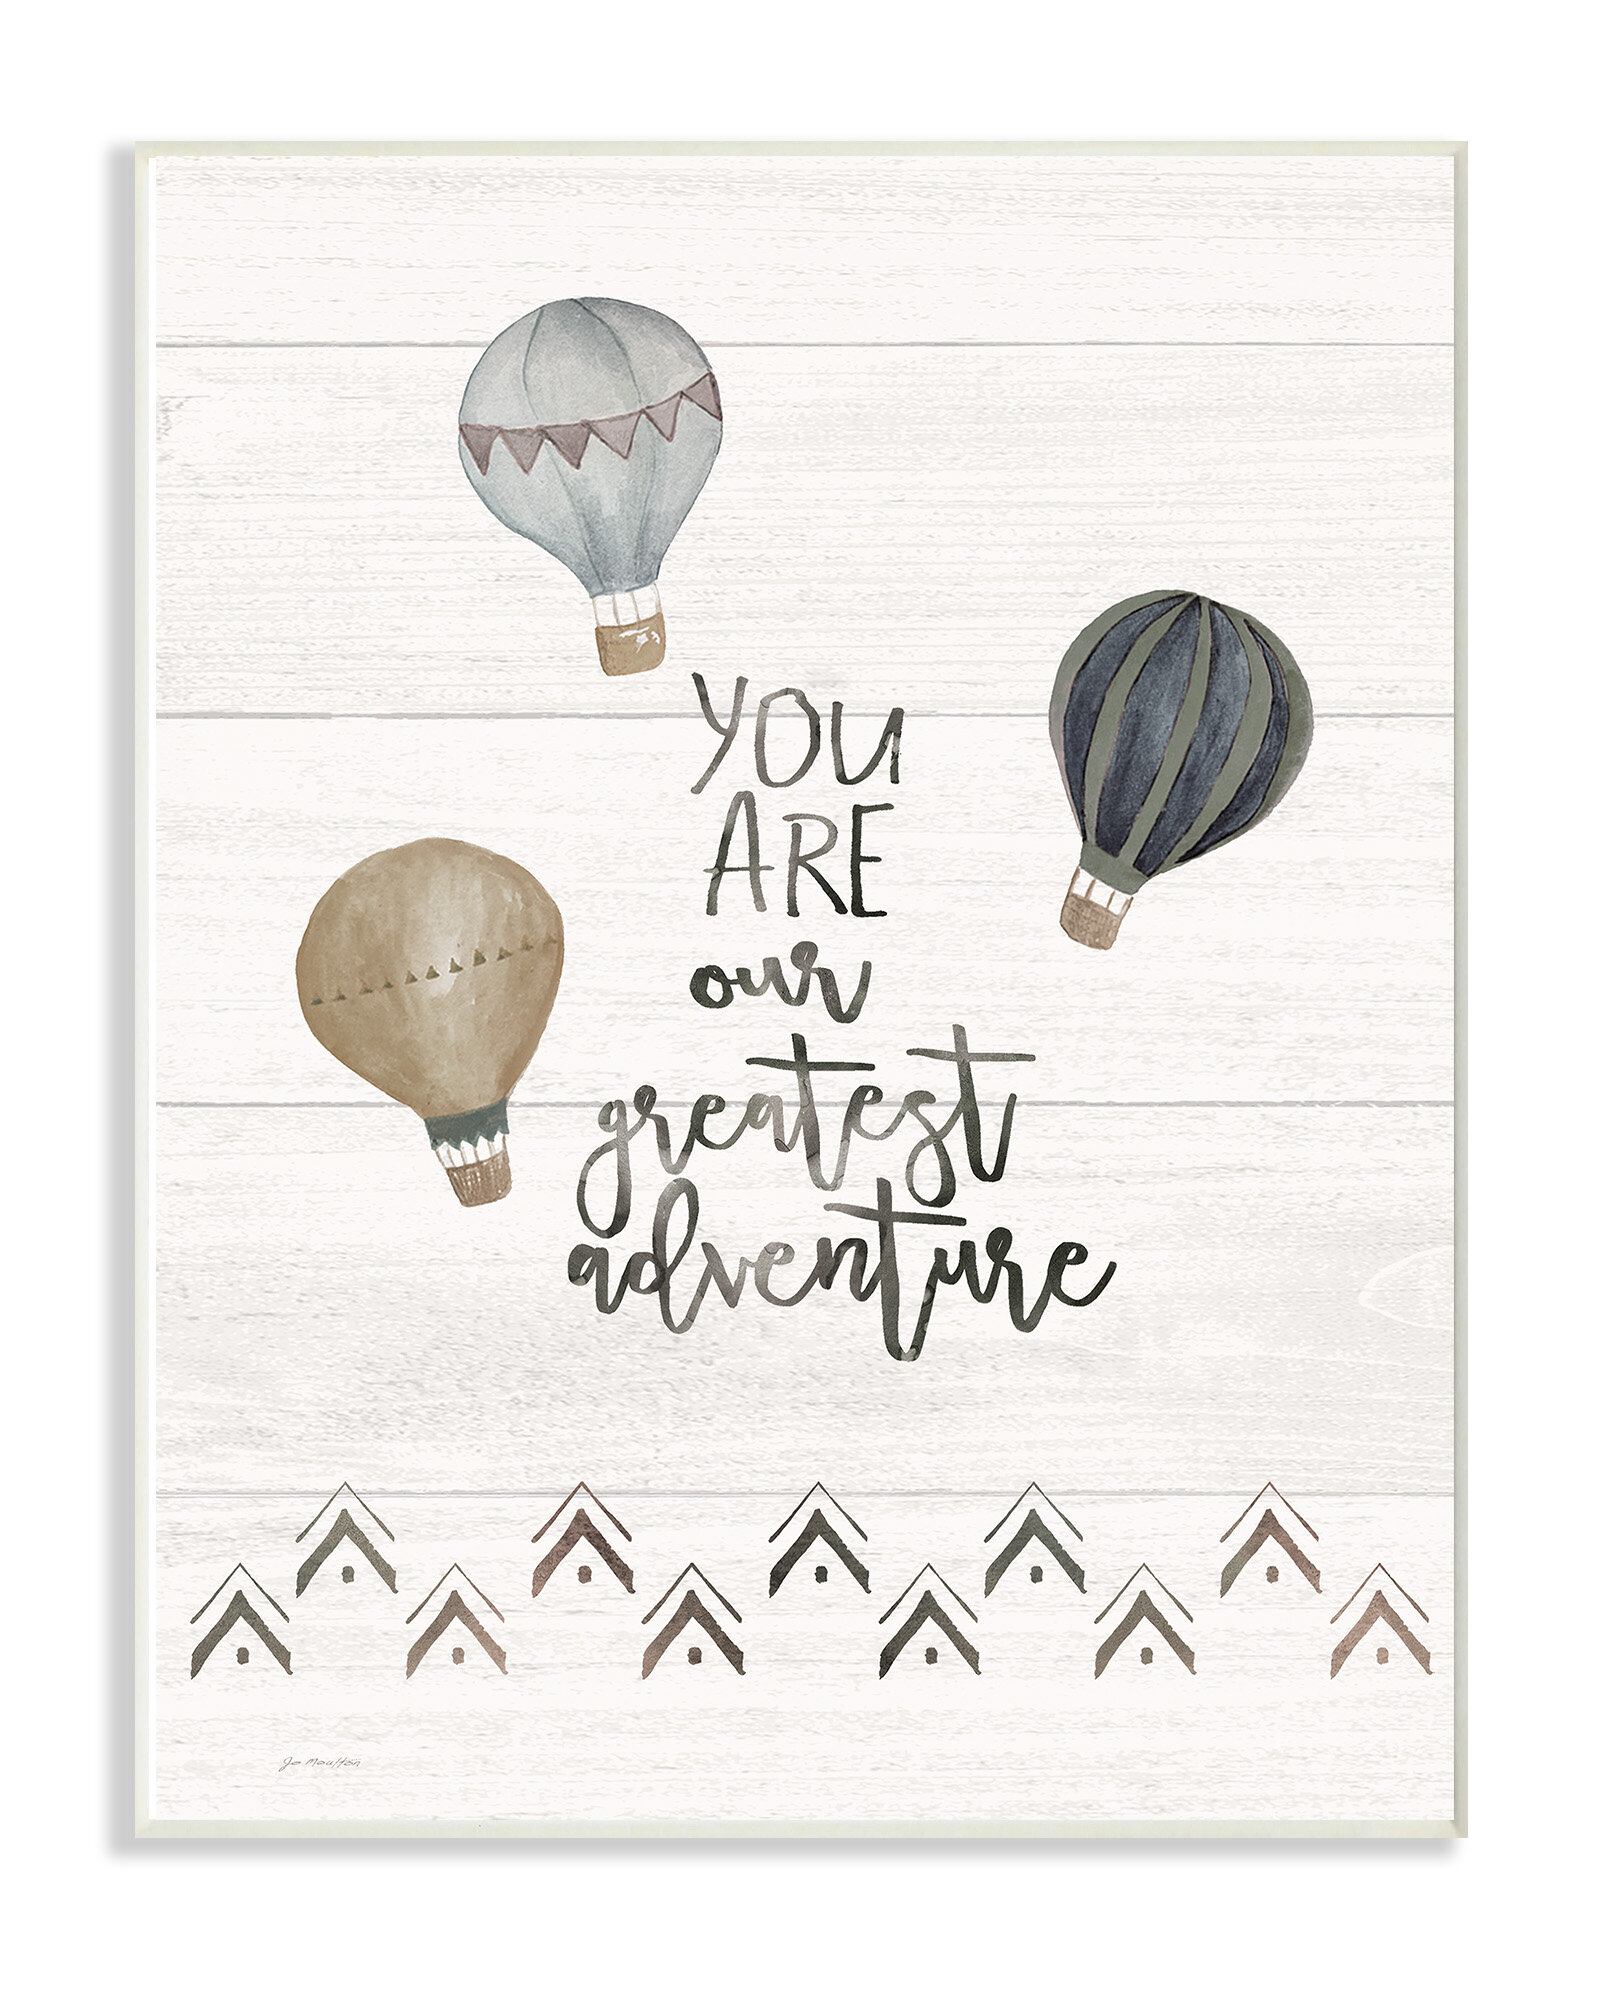 Giving More Hot Air Balloon Quote Cartoon Quotes Decors Wall